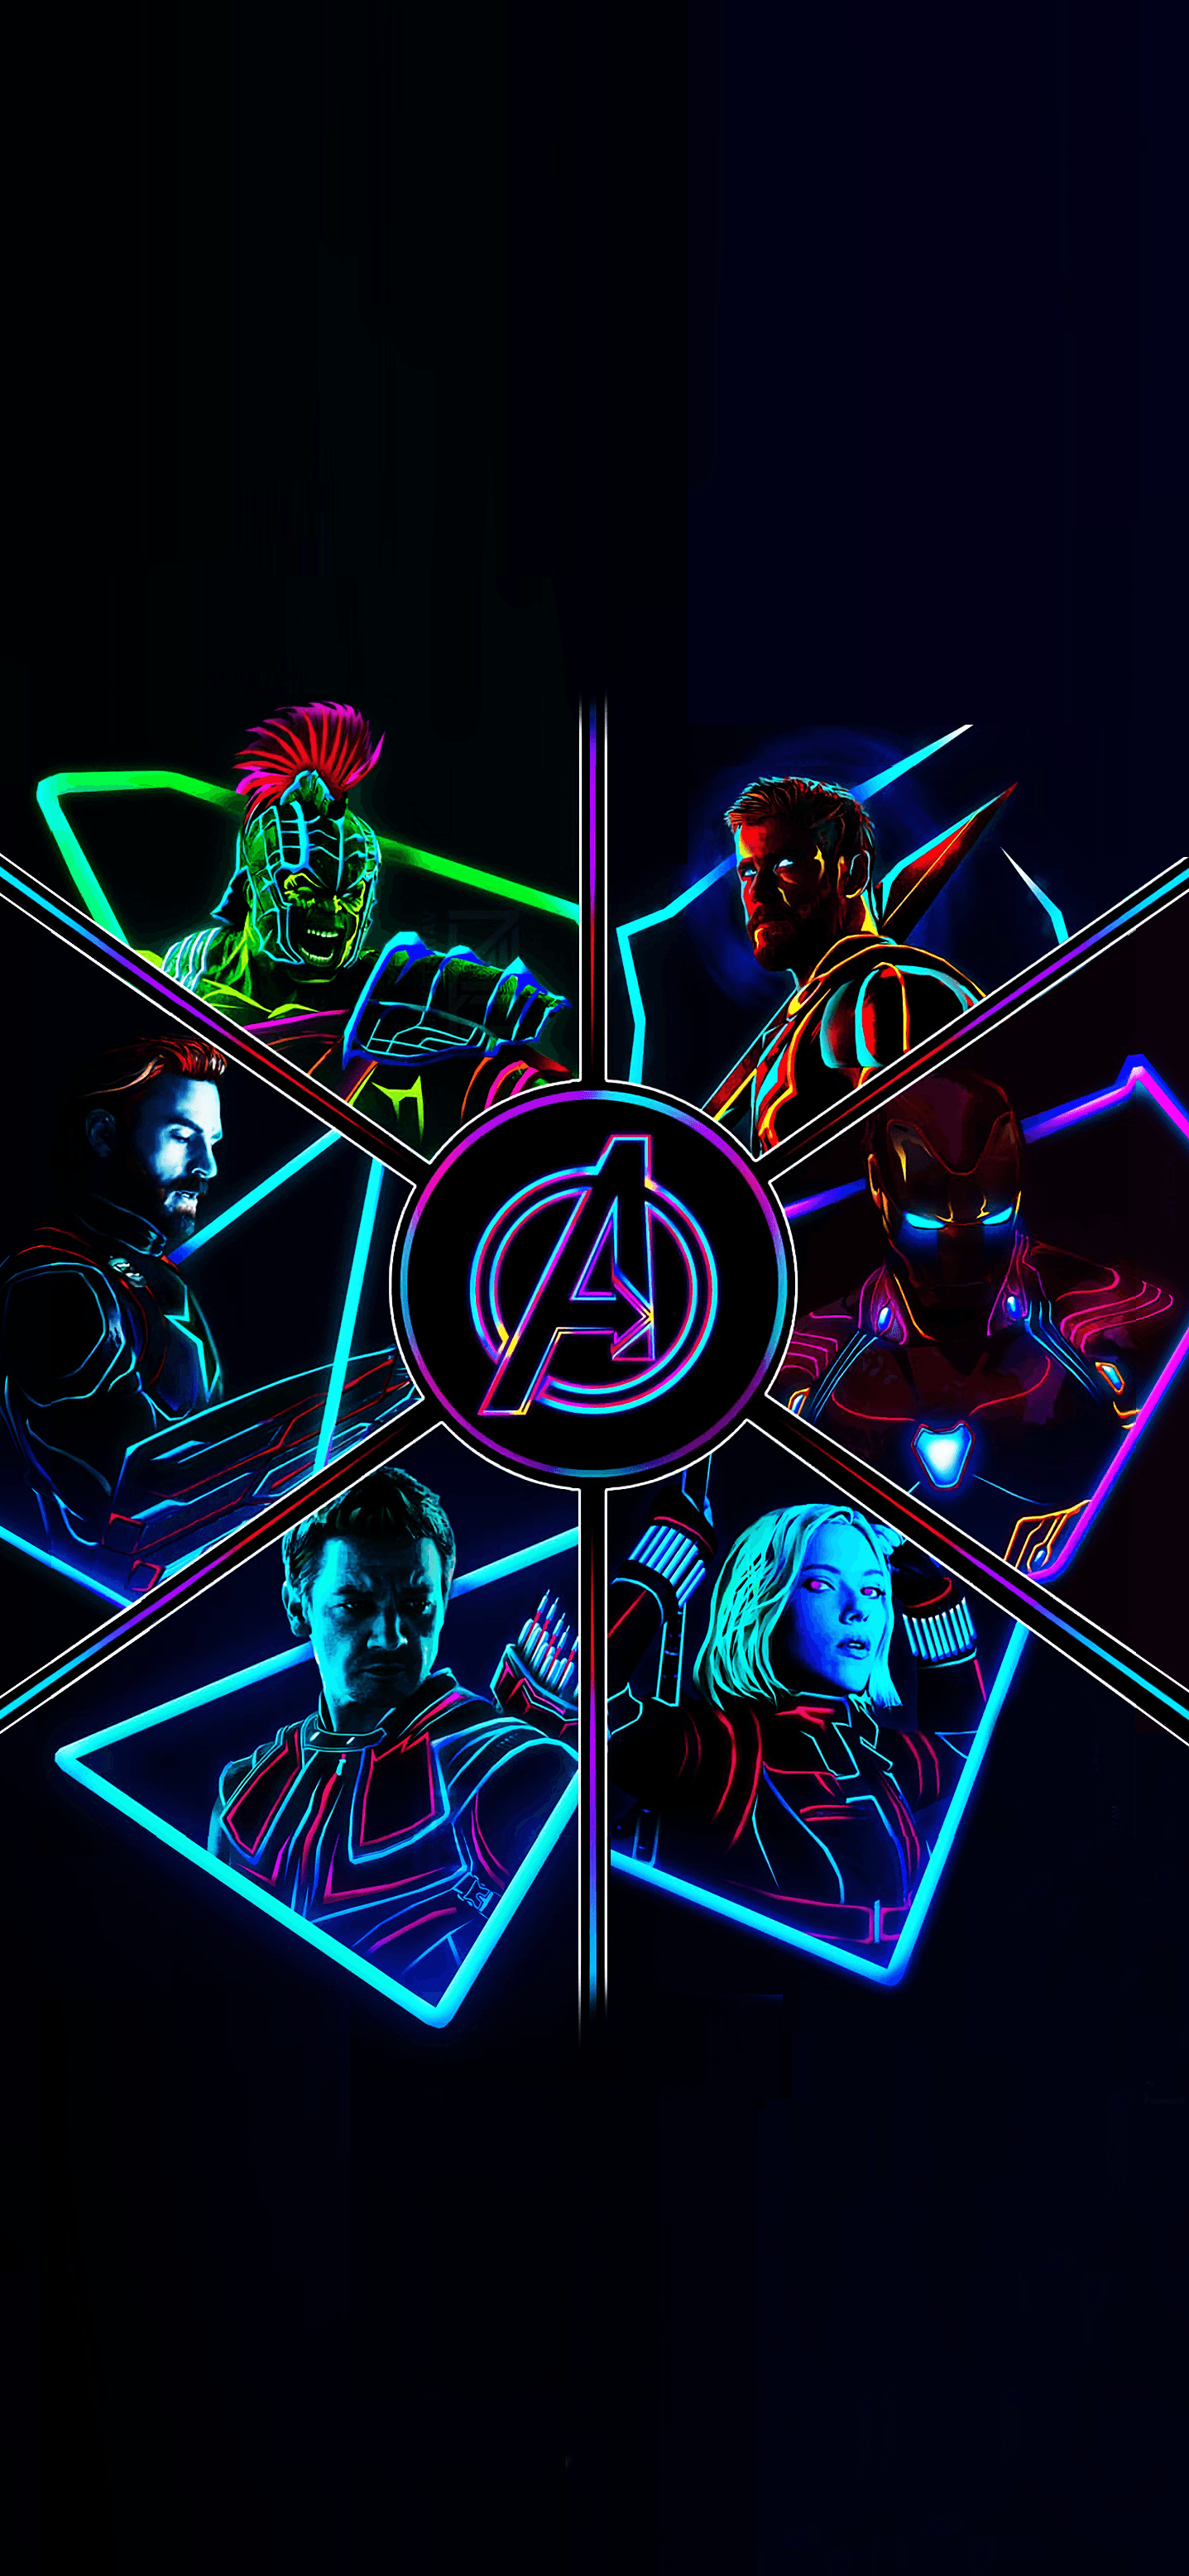 Bring out your inner superhero with these captivating Marvel Aesthetic images that will leave you wanting more. From Spiderman to Captain America, each wallpaper showcases the iconic characters in a way you\'ve never seen before. Click to be transported to the Marvel universe.